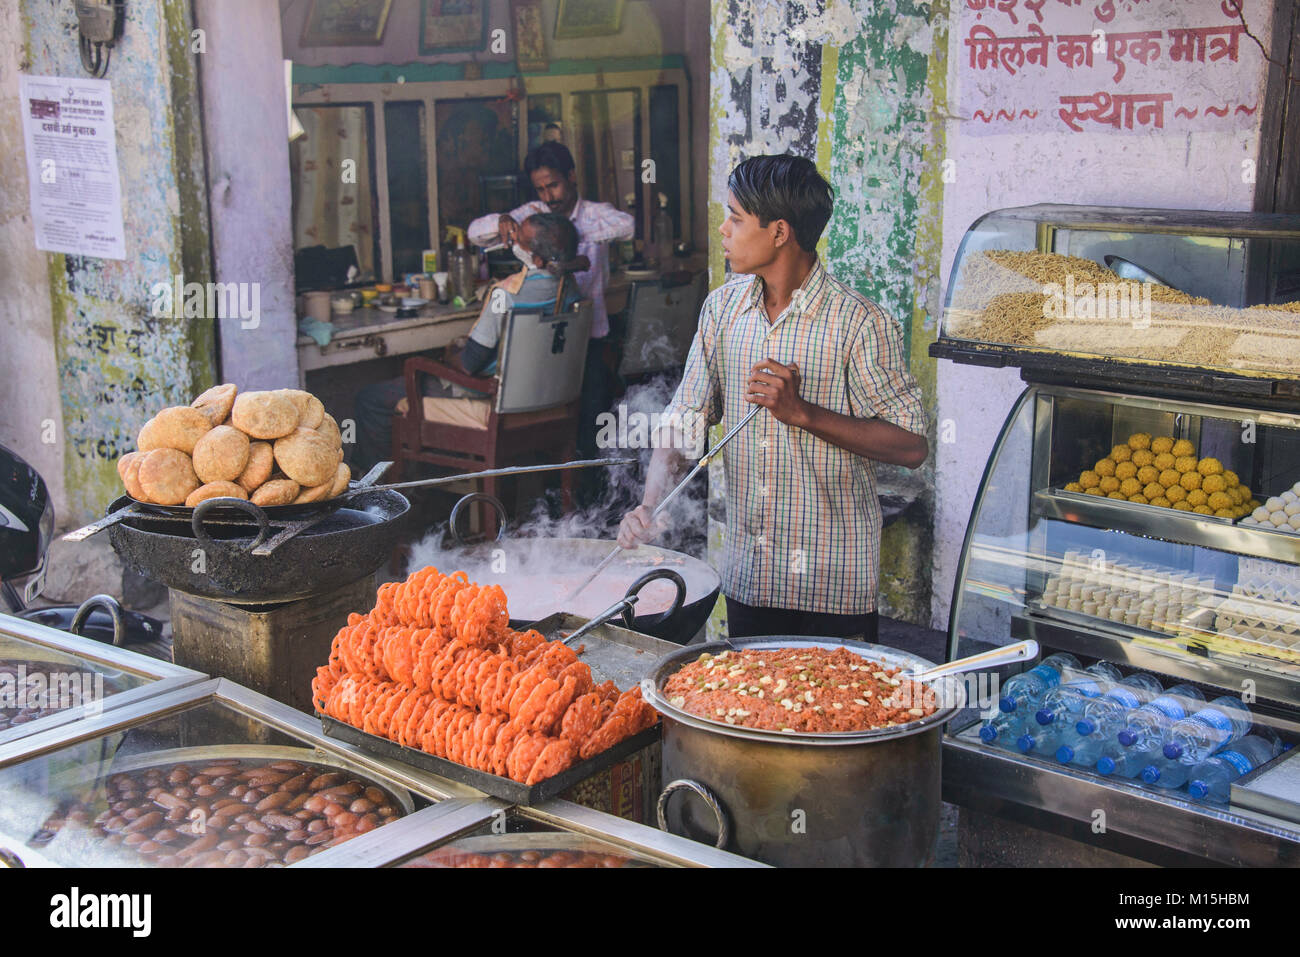 Indian boy cooking confections, Pushkar, Rajasthan, India Stock Photo